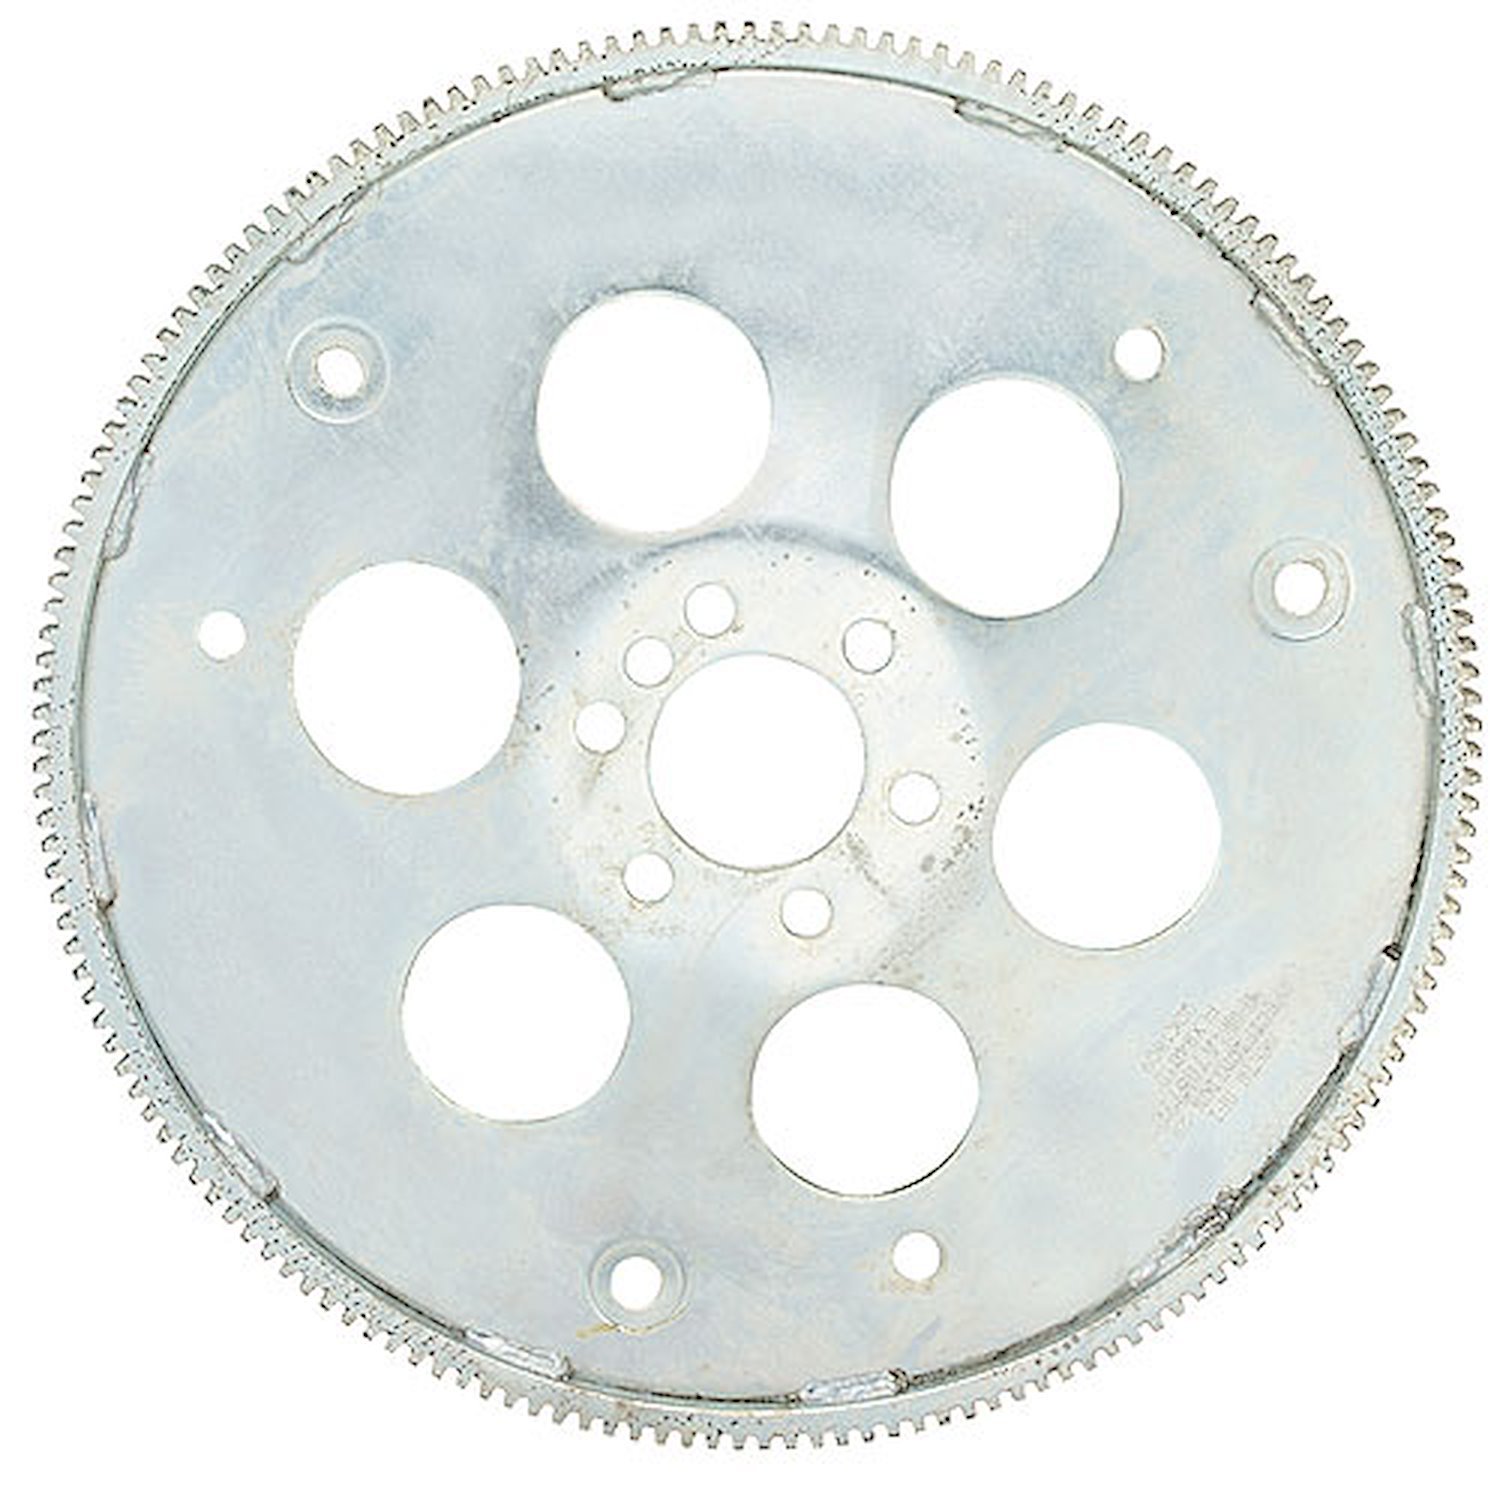 Heavy-Duty Flexplate 1997-Up Chevy LS 4.8/ 5.3/ 6.0/ 6.2/ 7.0L